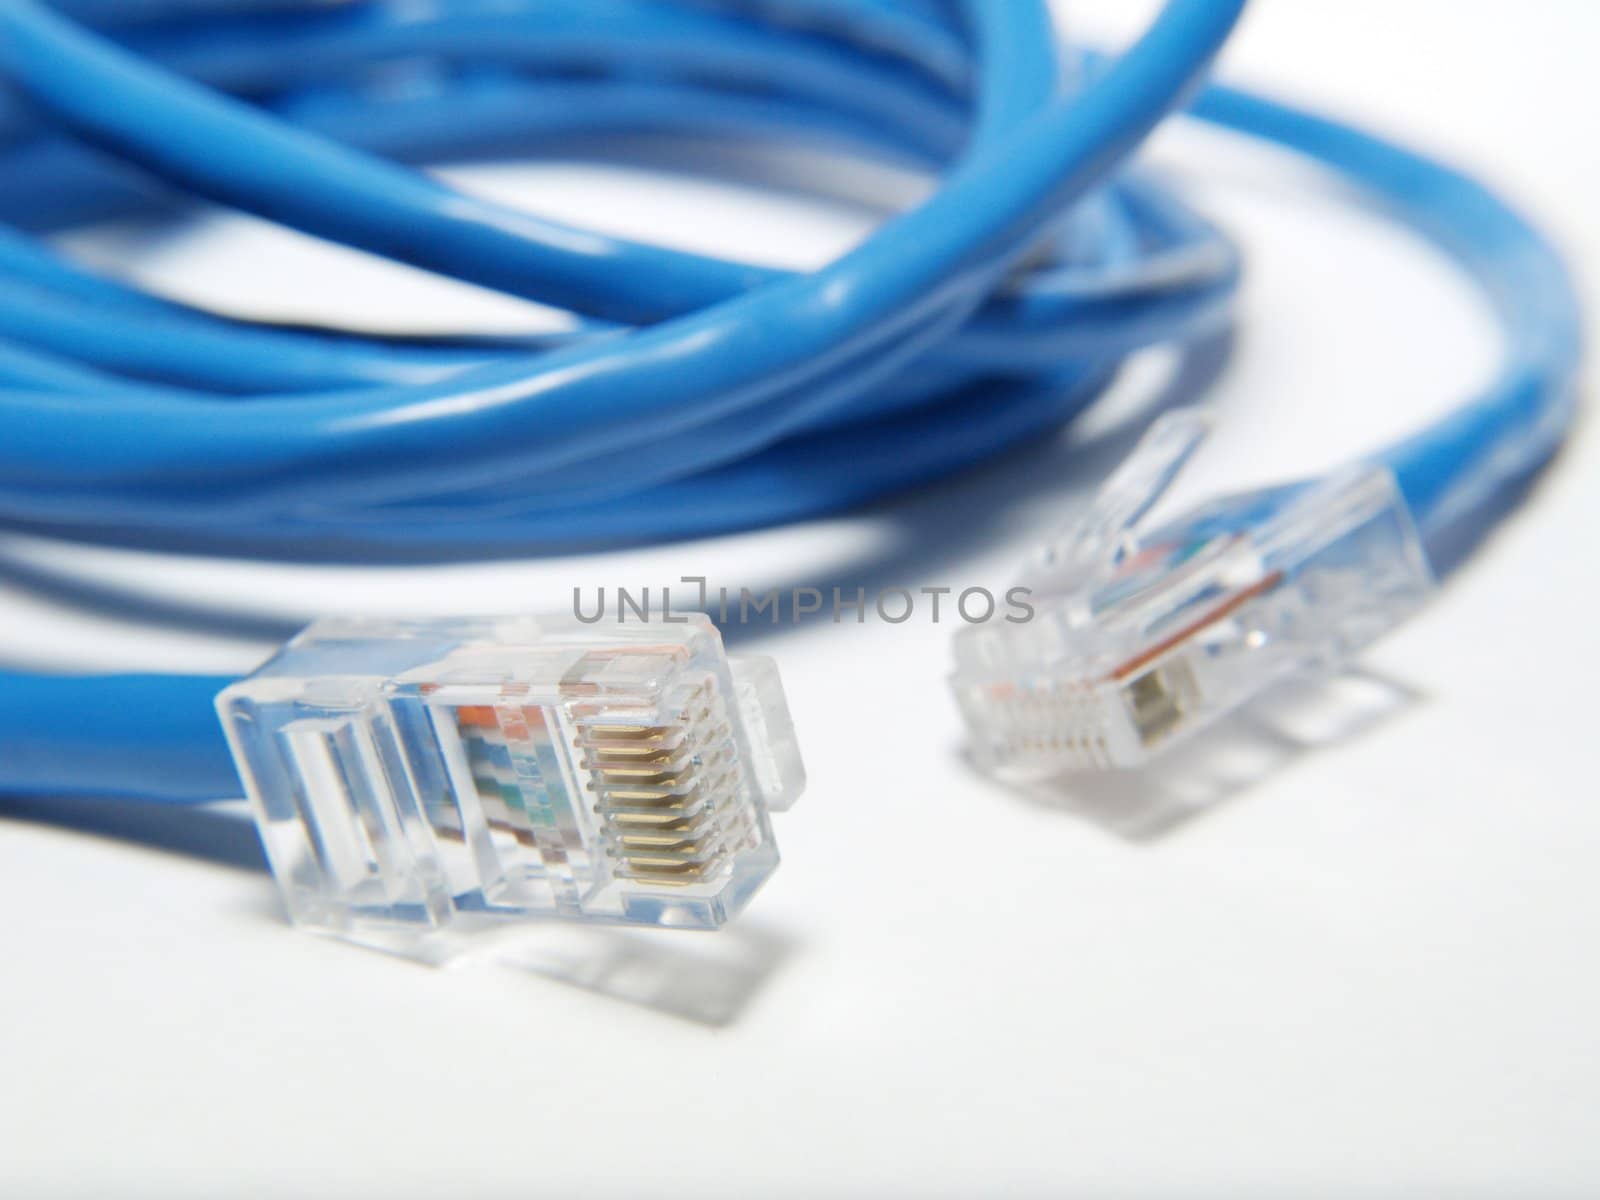 Utp cable for internet by anderm